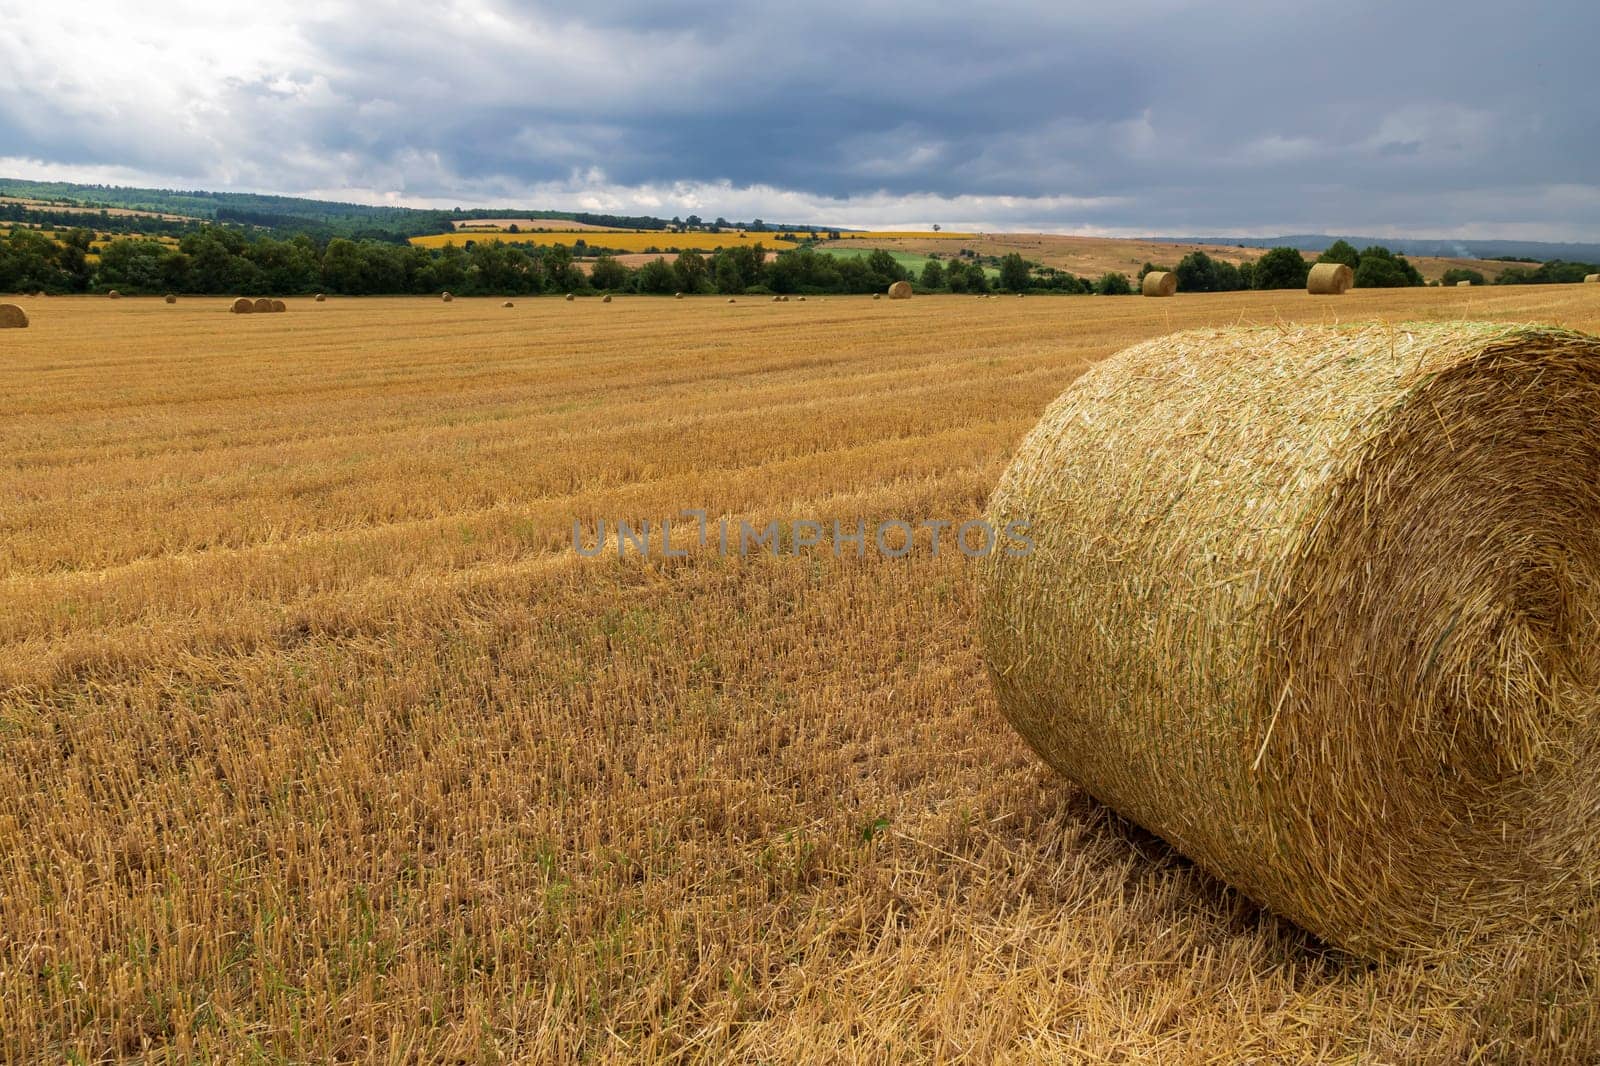 Big bales of hay on the field after harvest